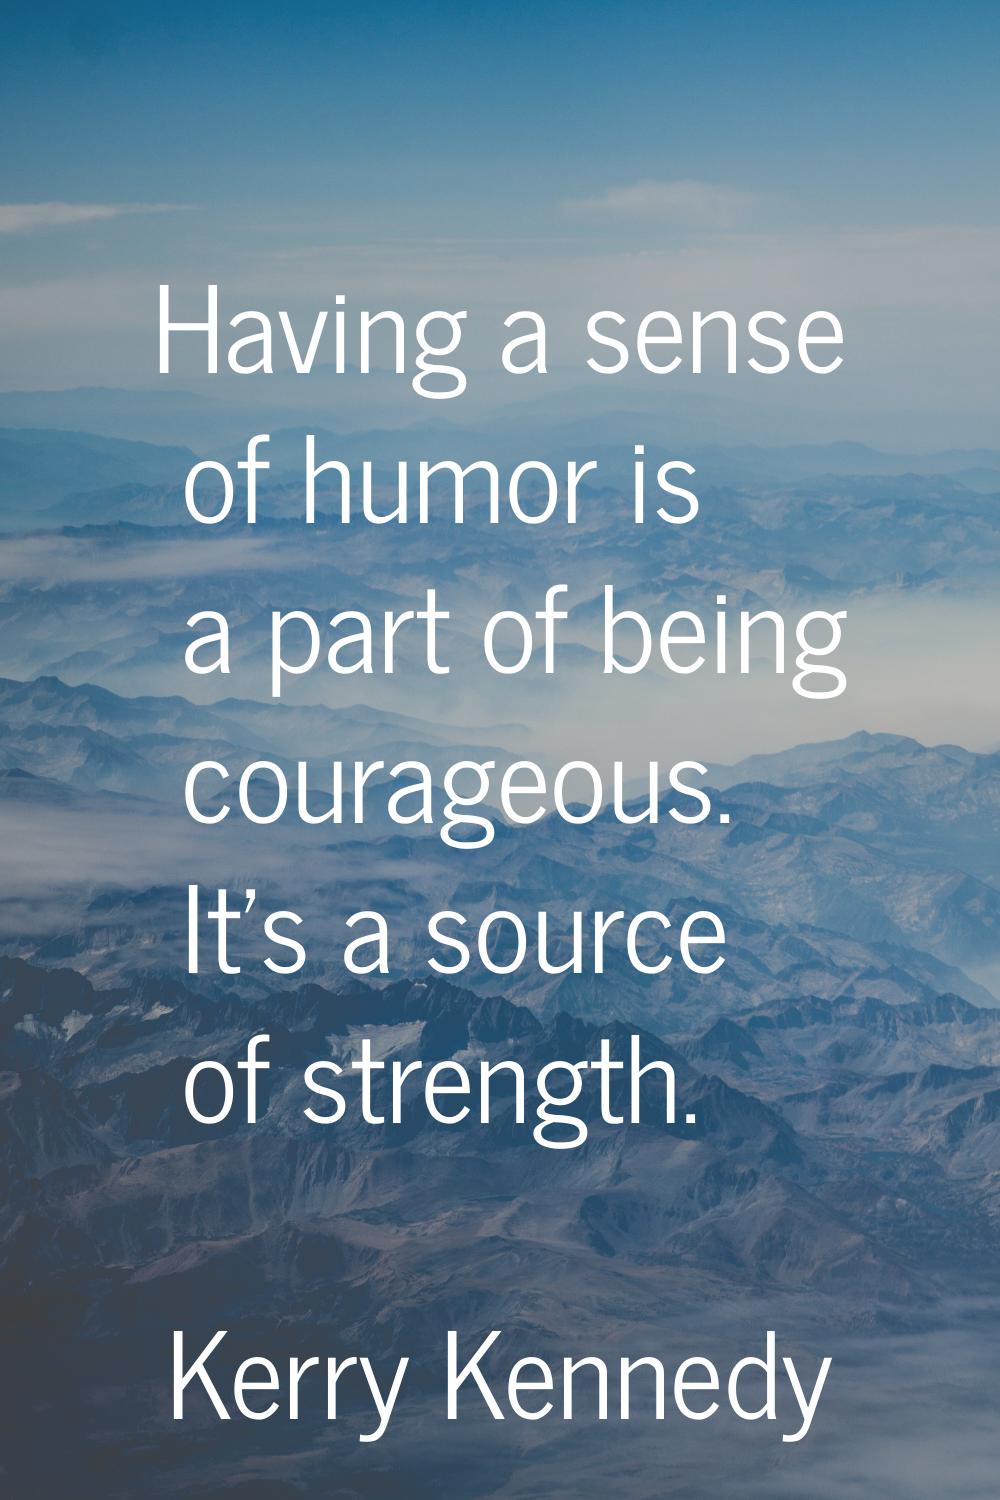 Having a sense of humor is a part of being courageous. It's a source of strength.